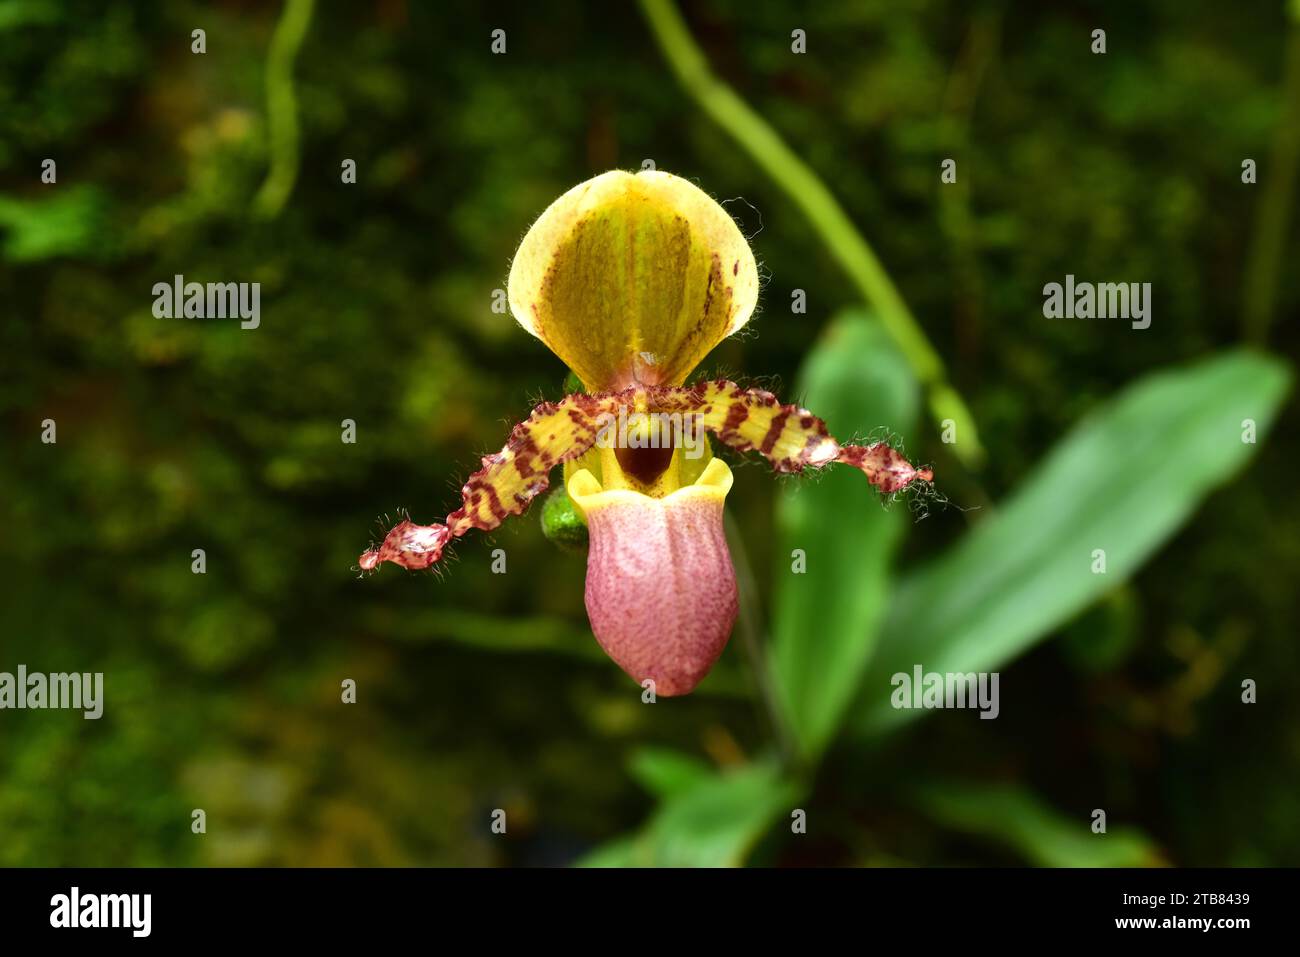 Paphiopedilum liemianum is an ornamental orchid endemic to Sumatra. Stock Photo